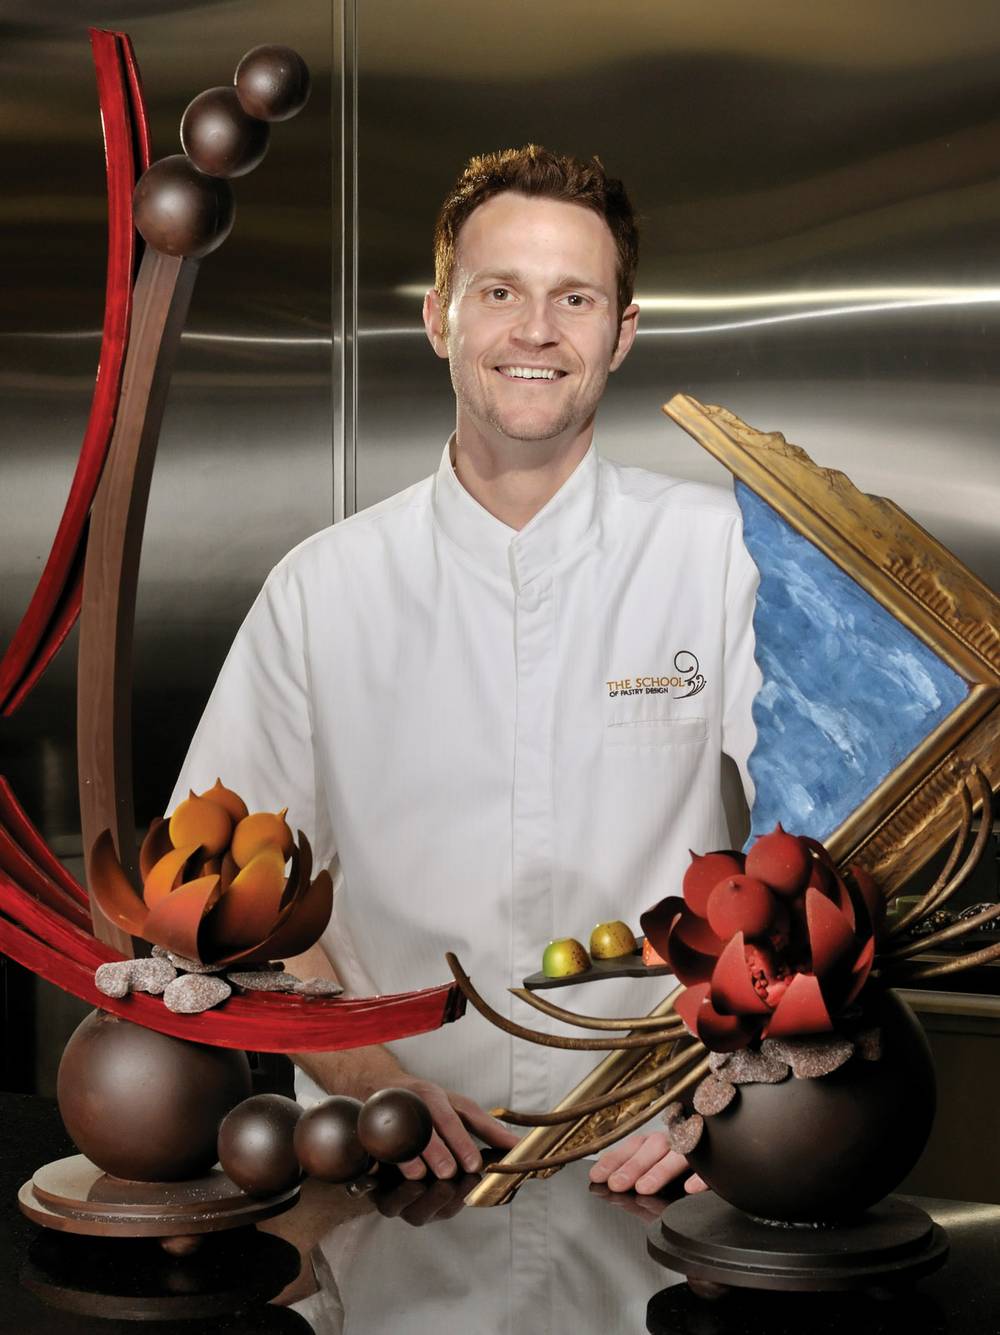 attribut arbejdsløshed At blokere Pastry champ Chris Hanmer on 'Top Chef' and good ganache - Las Vegas Weekly